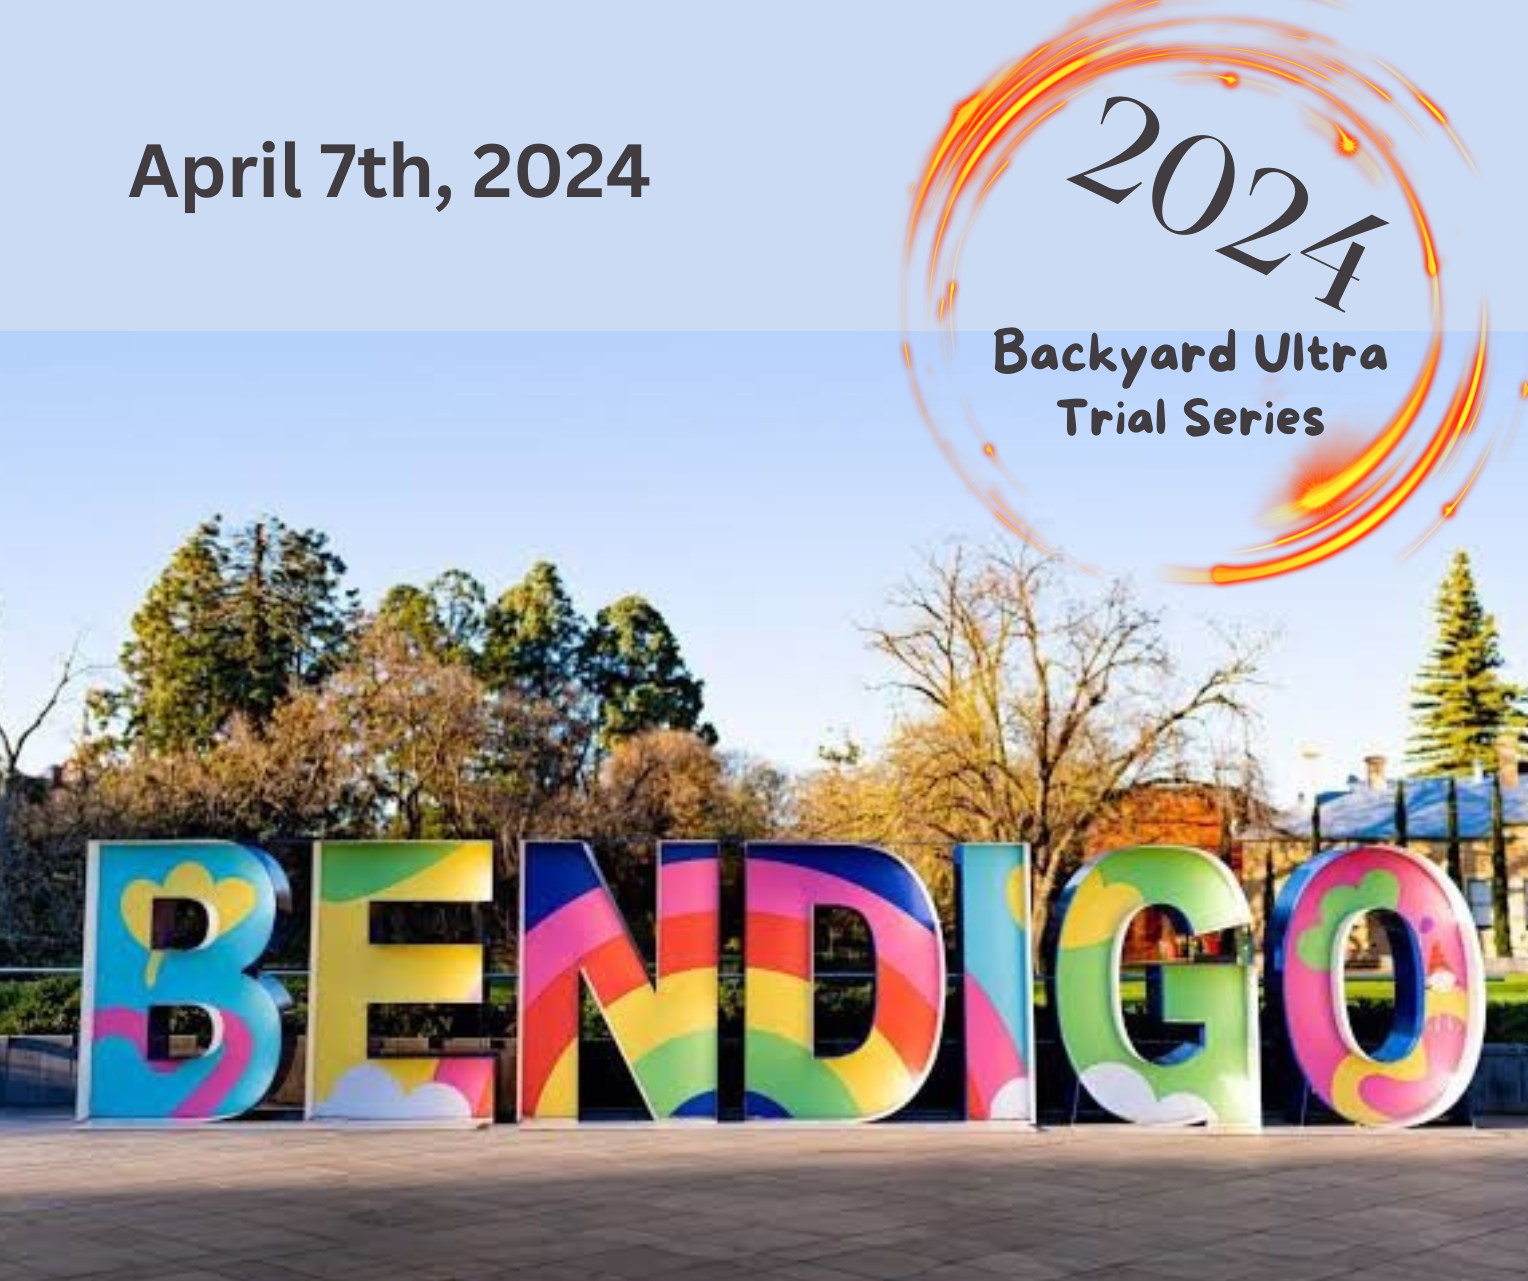 A backyard Ultra Trail event where runners new to the format can come and try the sport at low cost. Time is limited meaning that many aren't deterred by the potential big numbers. Seasoned backyard runners will also attend as training.